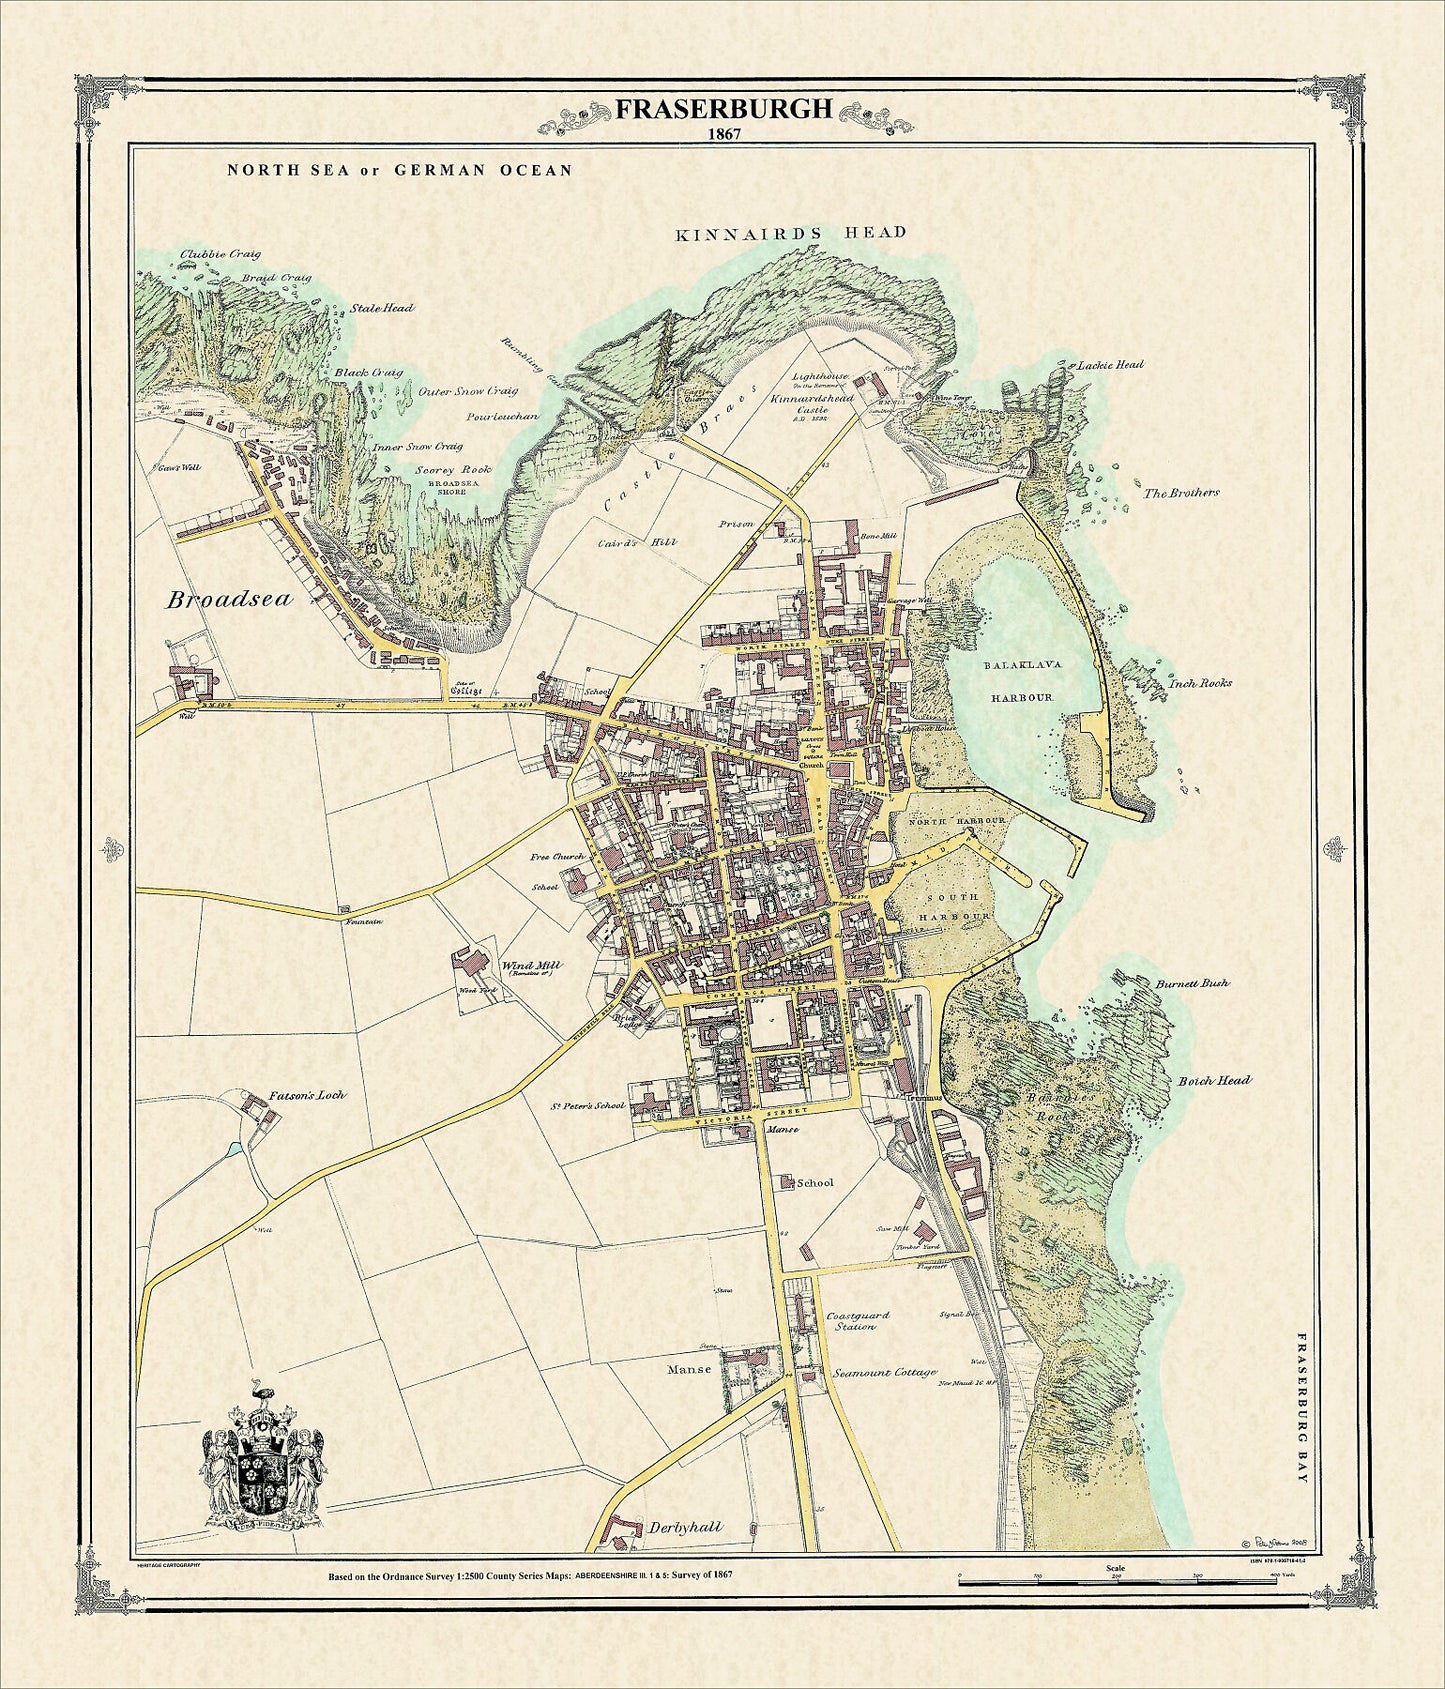 Coloured Victorian map of Fraserburgh in 1867 by Peter J Adams of Heritage Cartography